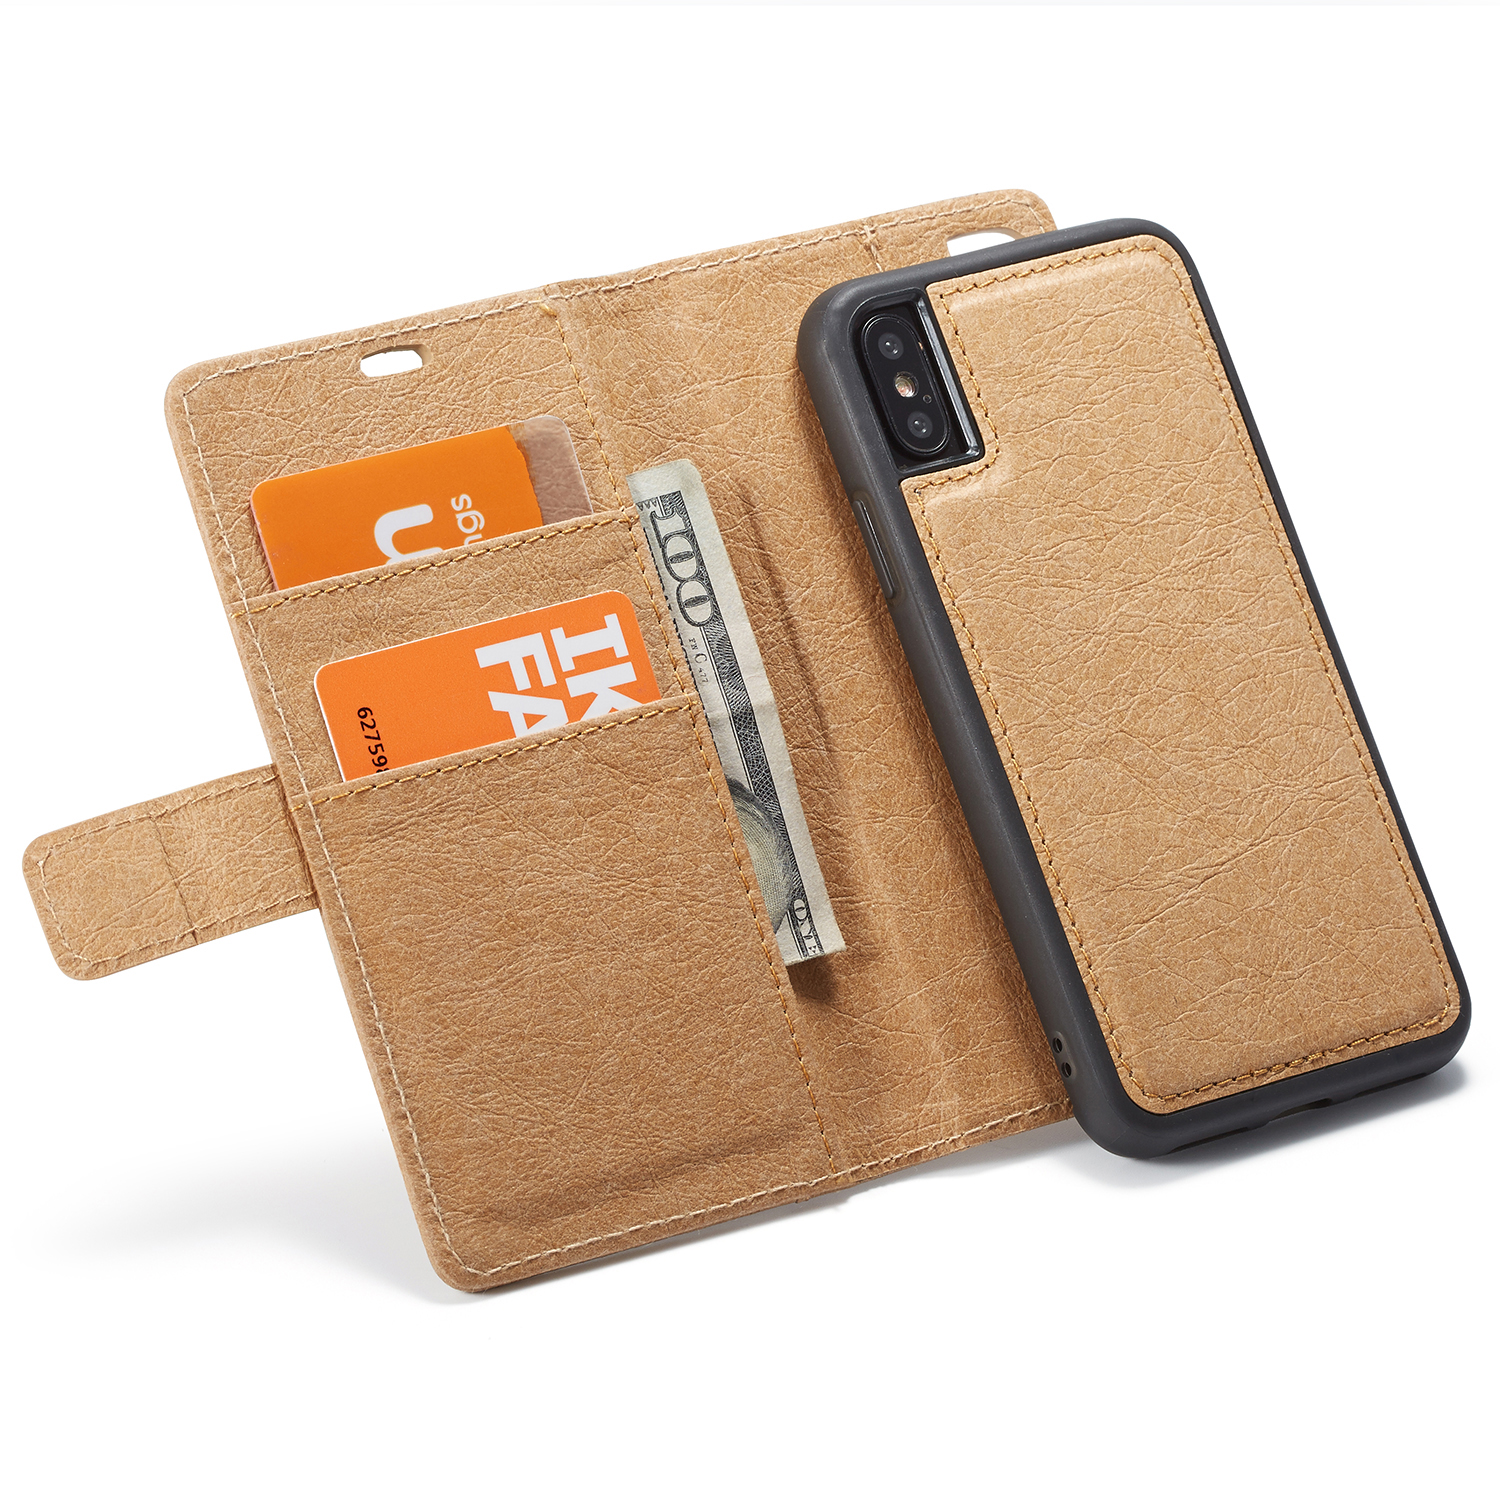 

WHATIF Protective Case For iPhone XS Max Waterproof Kraft Paper Magnetic Detachable Wallet